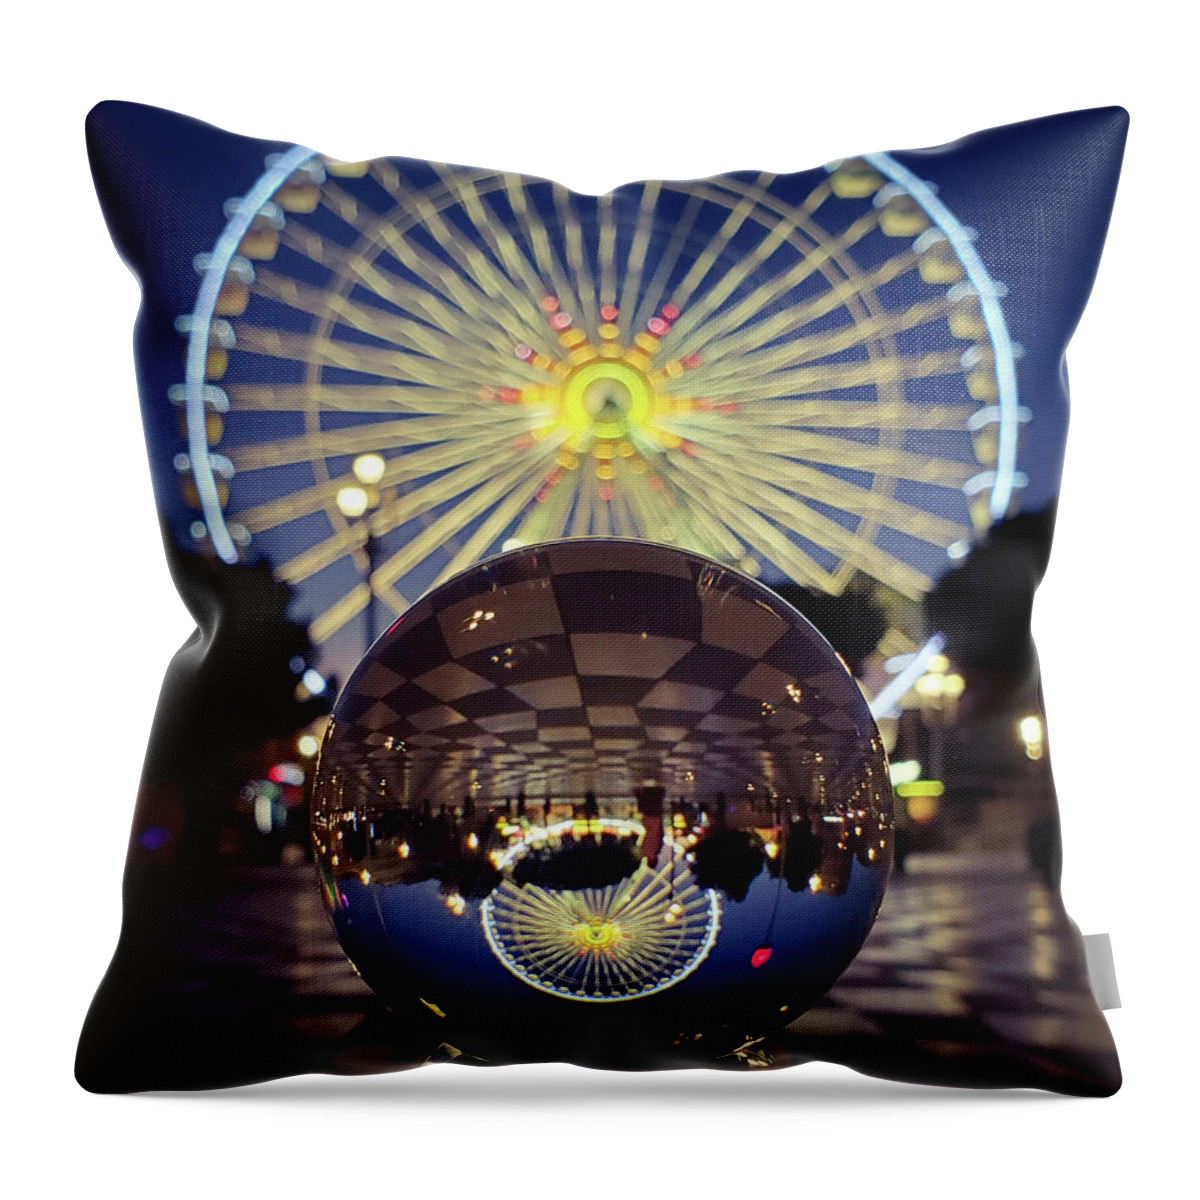 Reflections Throw Pillow featuring the photograph Spinning Worlds by Andrea Whitaker